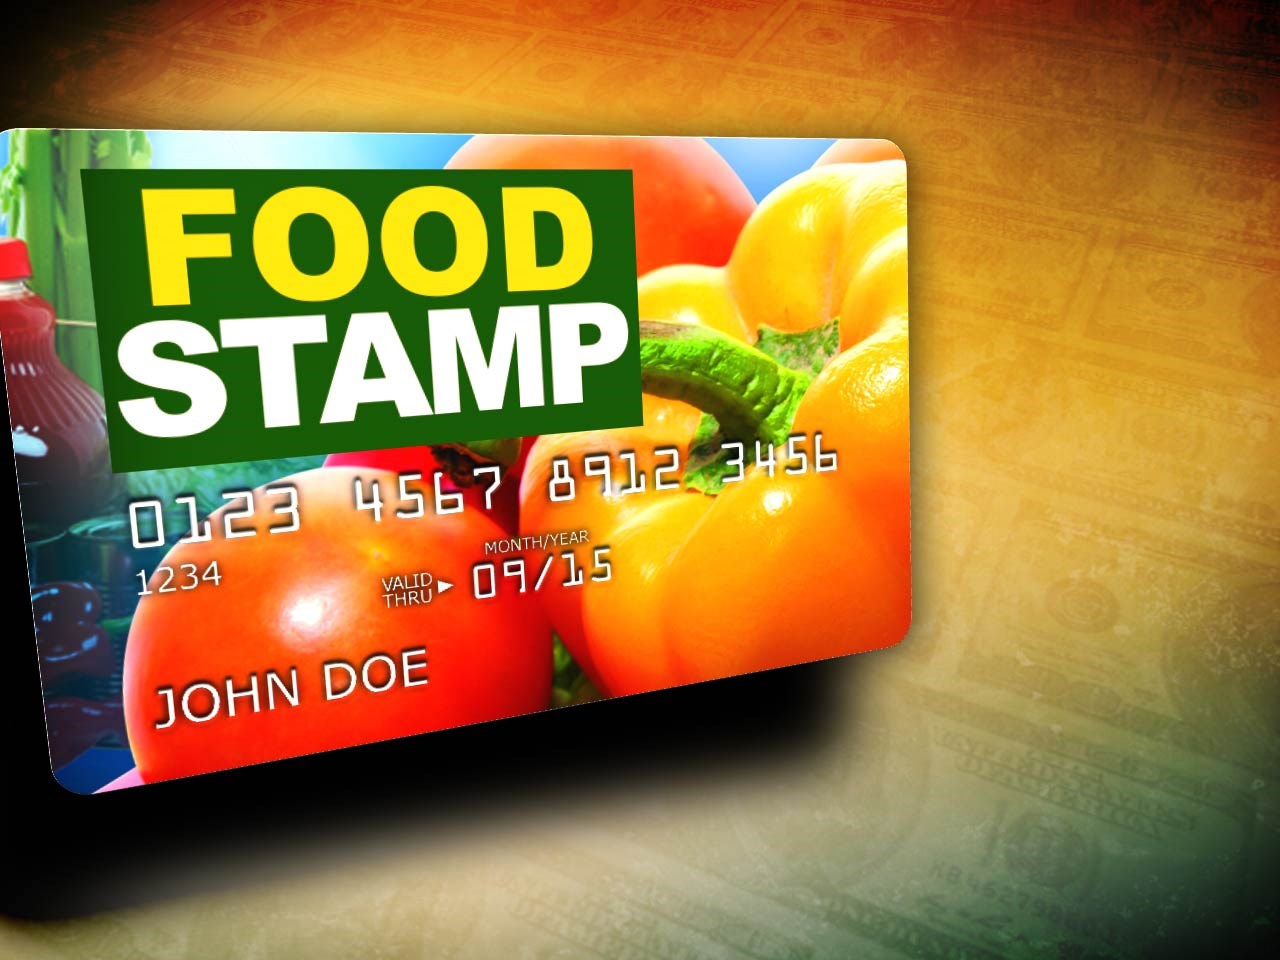 Food Stamps Office - Food Stamps Now